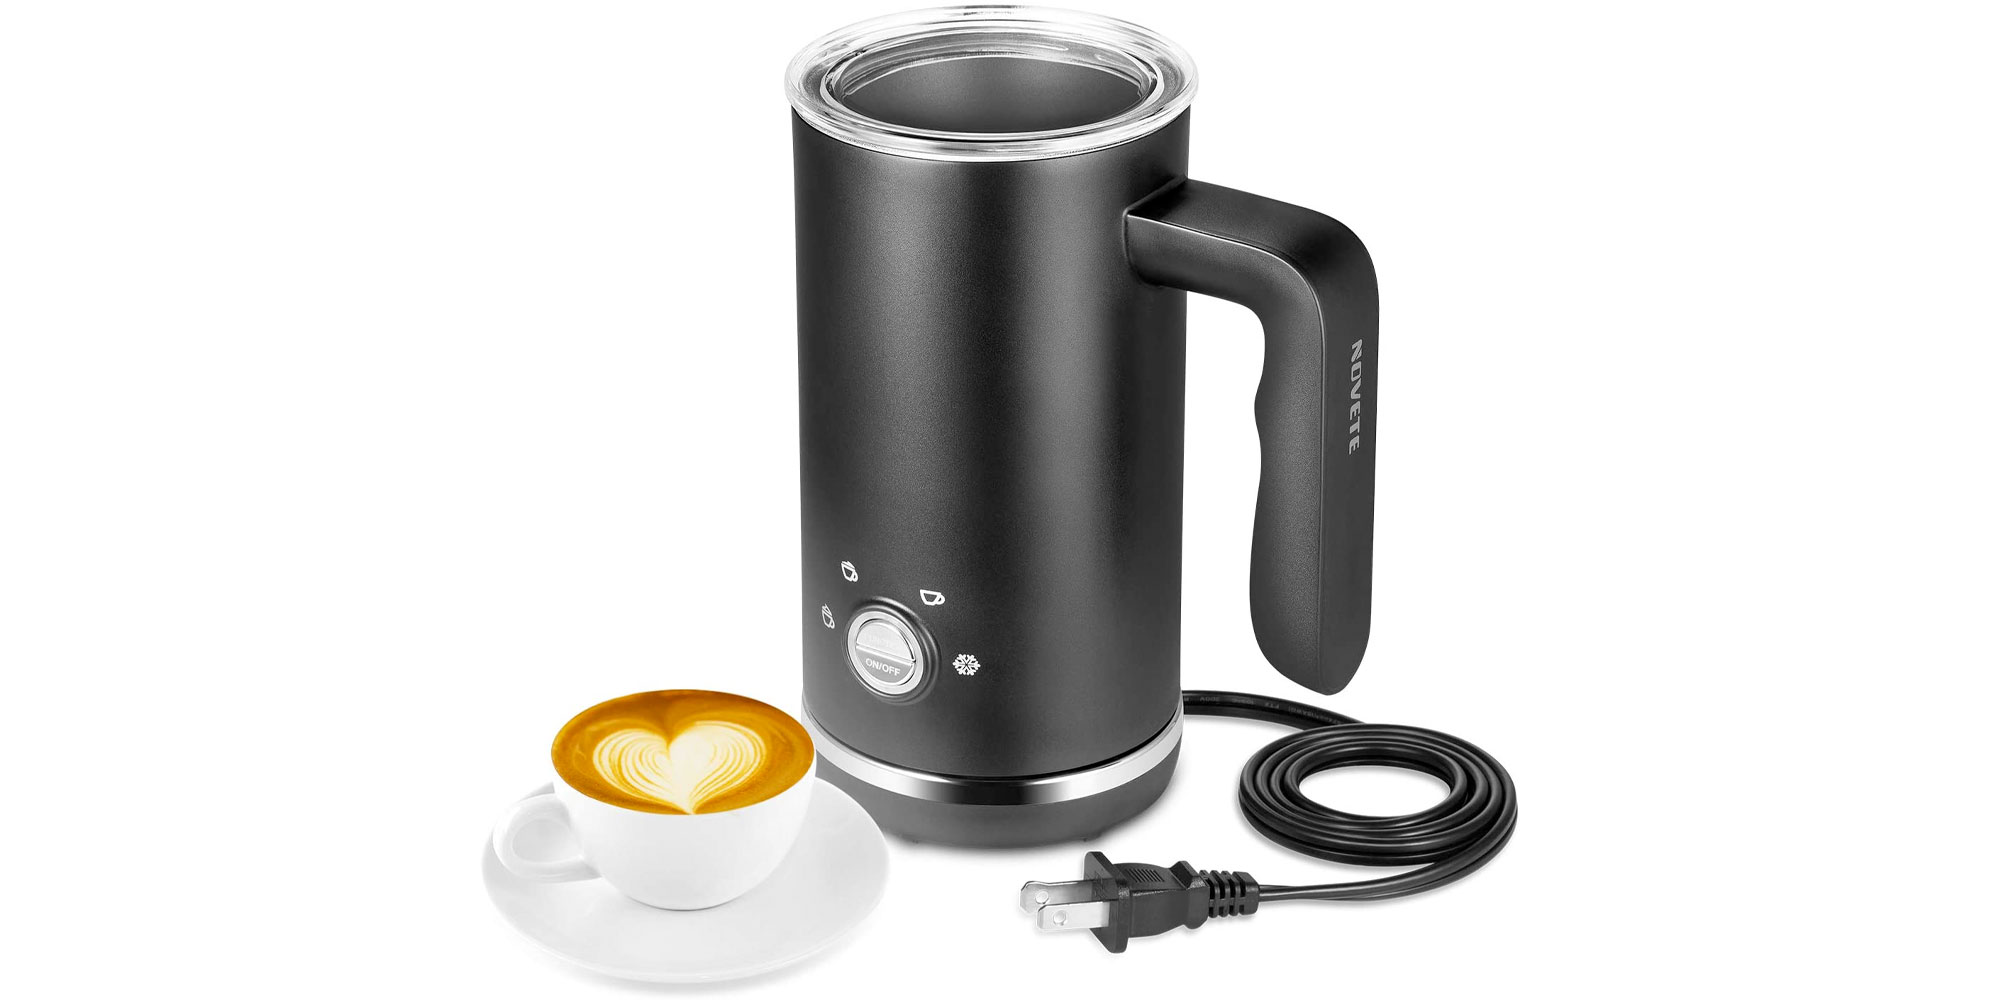 https://9to5toys.com/wp-content/uploads/sites/5/2020/09/milk-frother.jpg